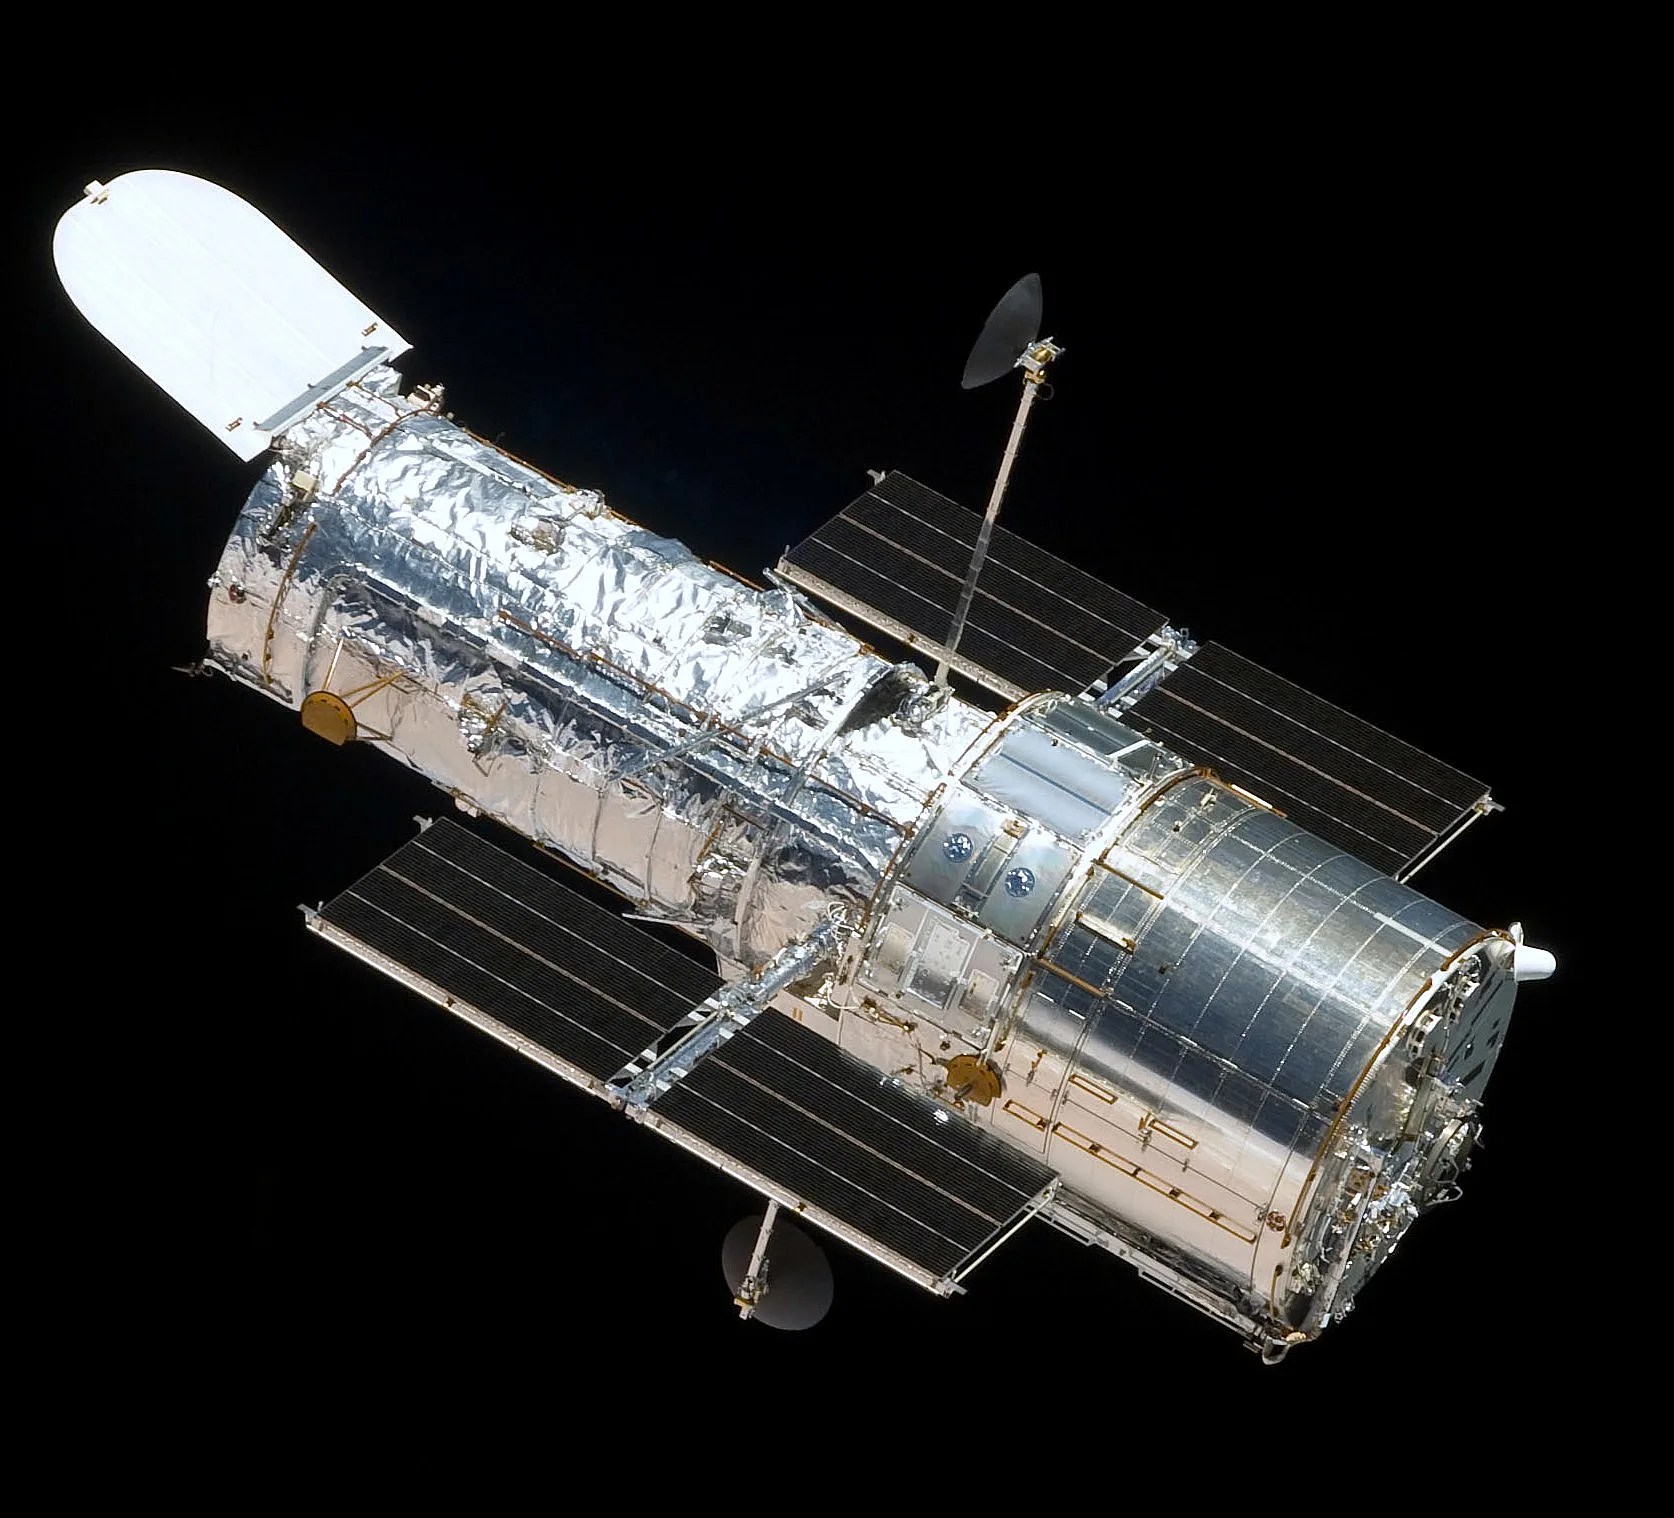 an image of the Hubble Space Telescope